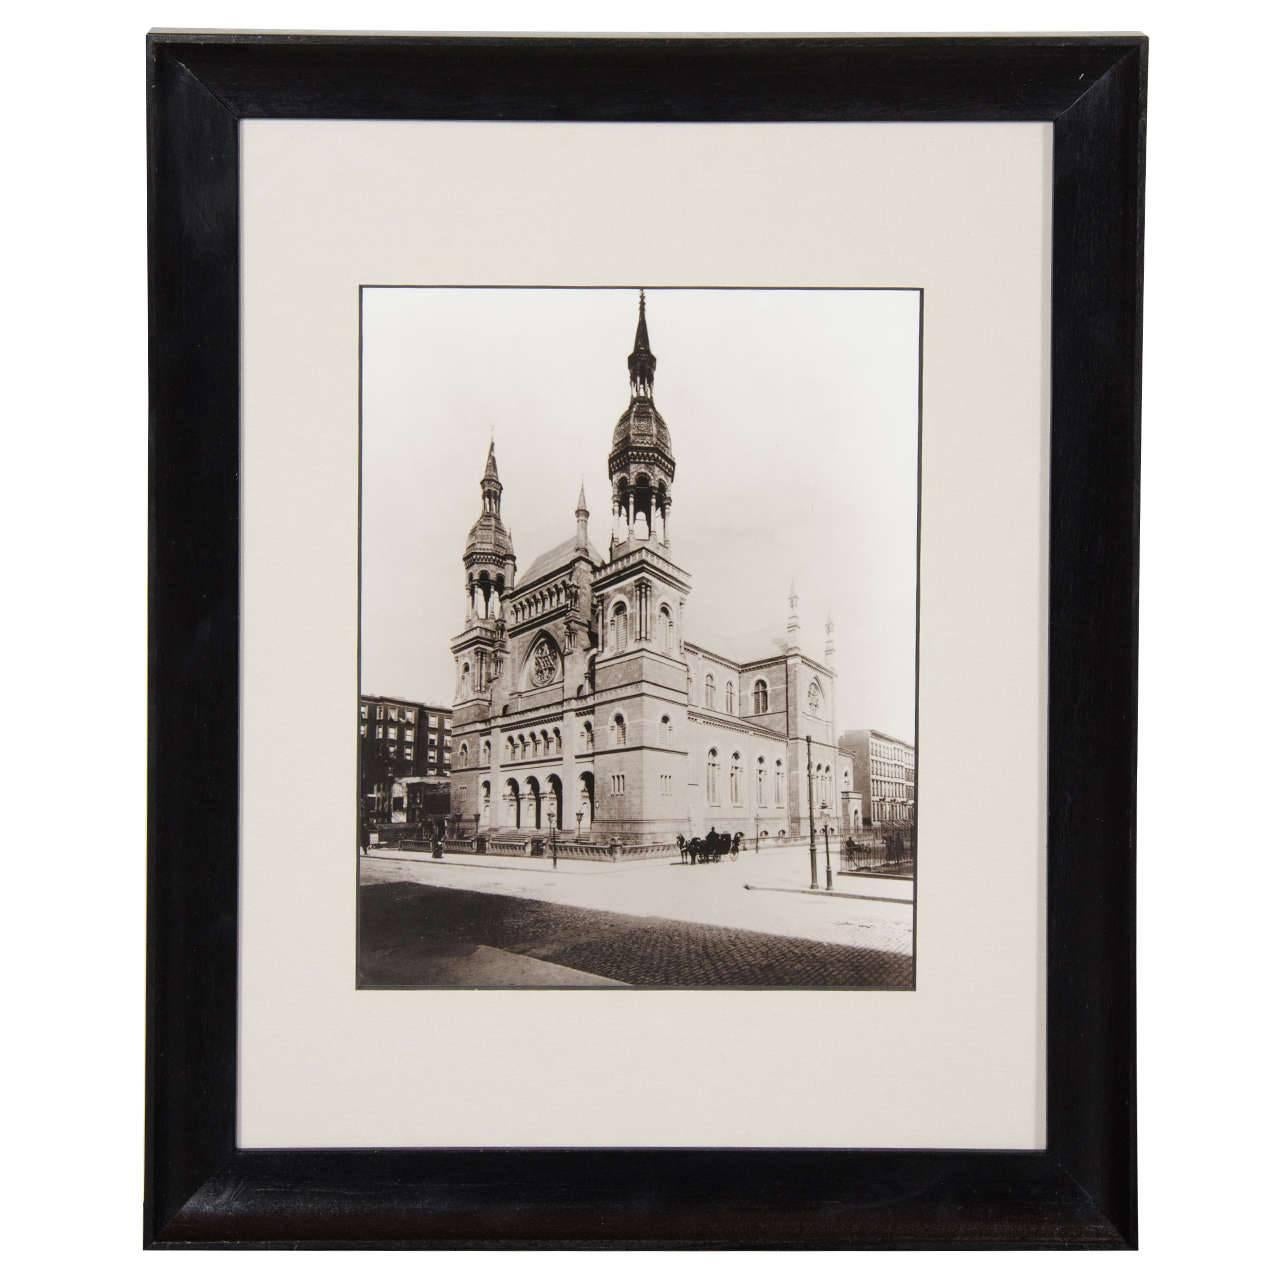 Unknown Landscape Photograph - Vintage Black and White Photograph of "Temple Emanu-El"in New York City